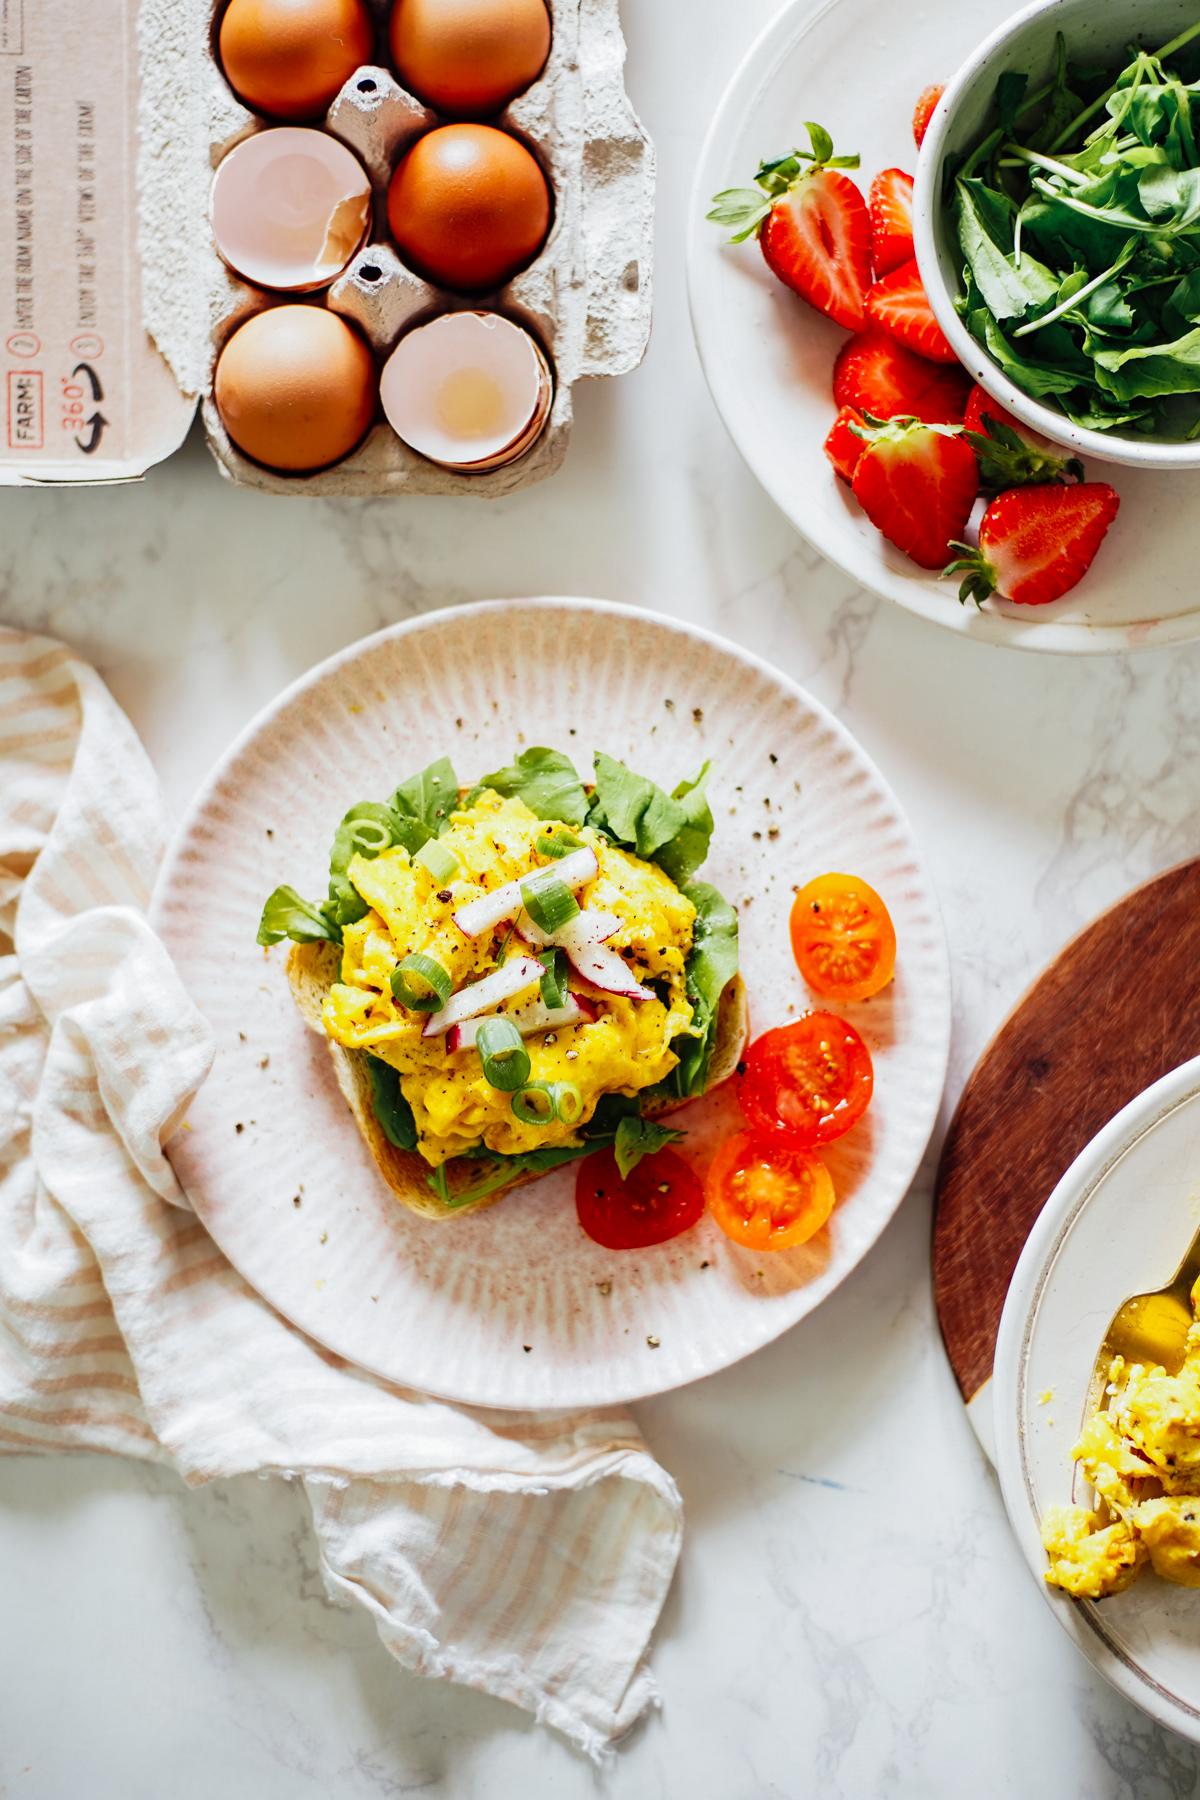 15 Different Ways to Cook Eggs for Breakfast (Easy, Healthy)